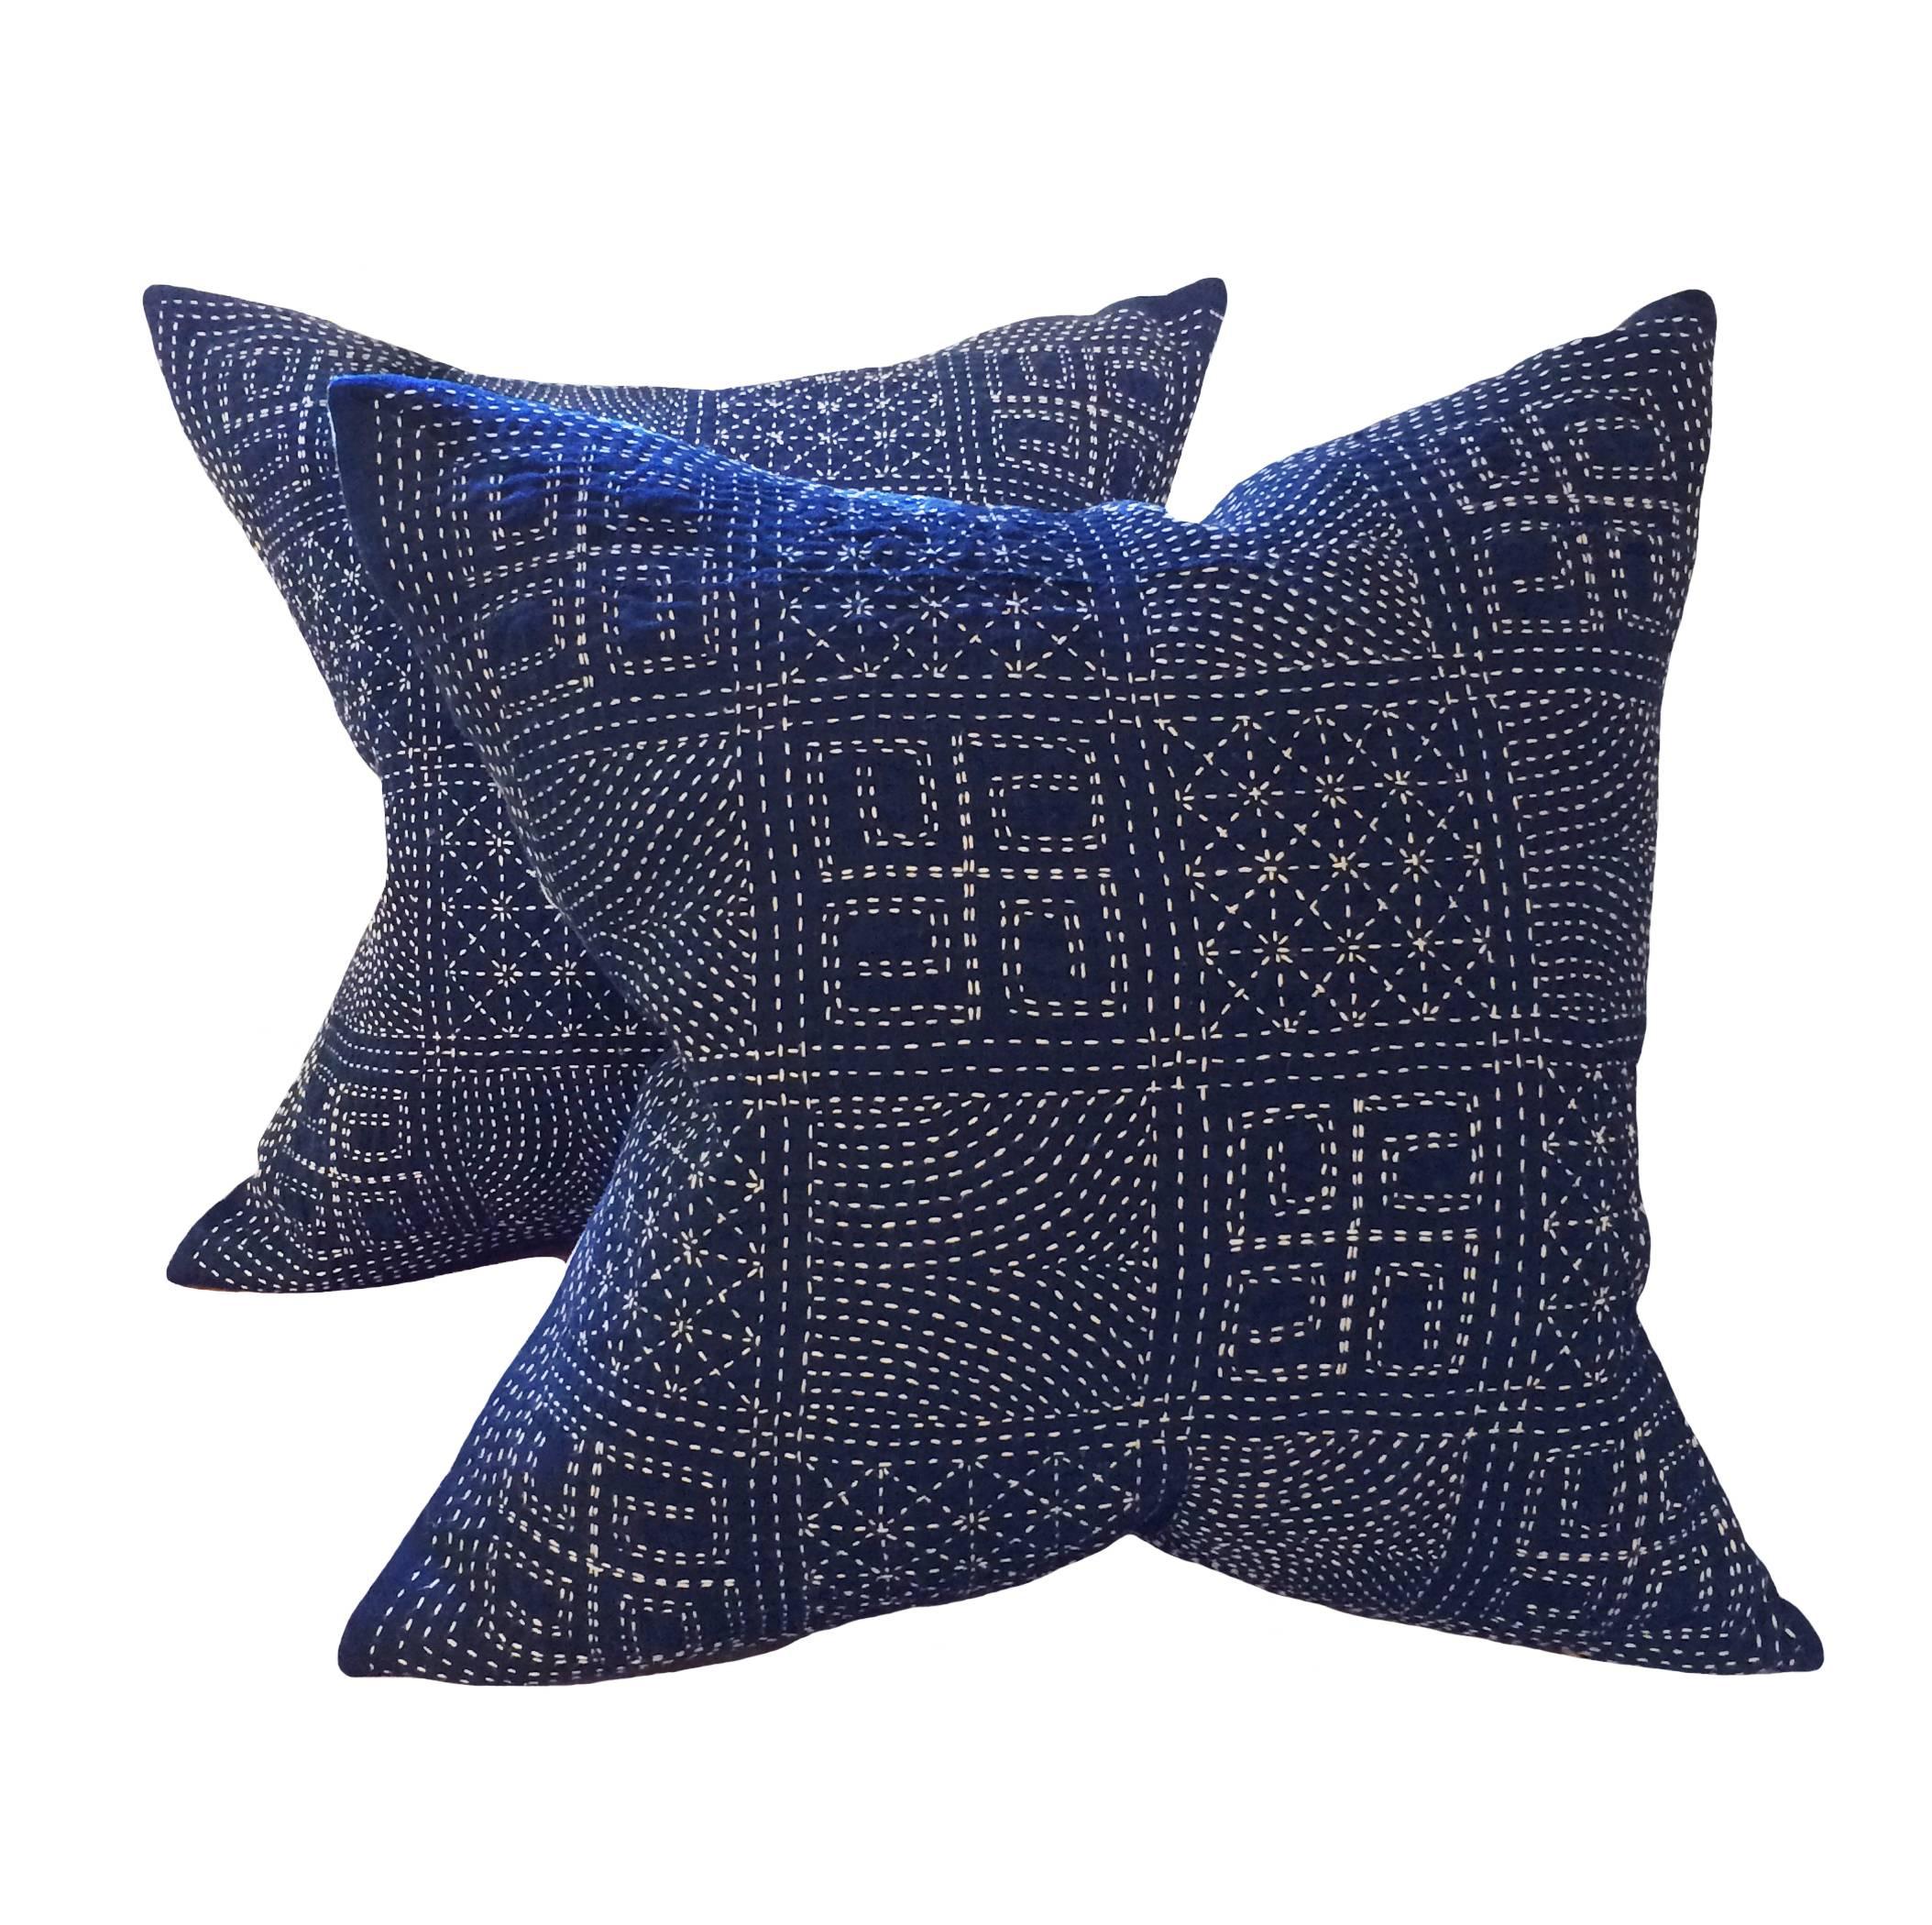 Pair of Japanese Indigo Embroidered Down Pillows In Excellent Condition For Sale In Montecito, CA